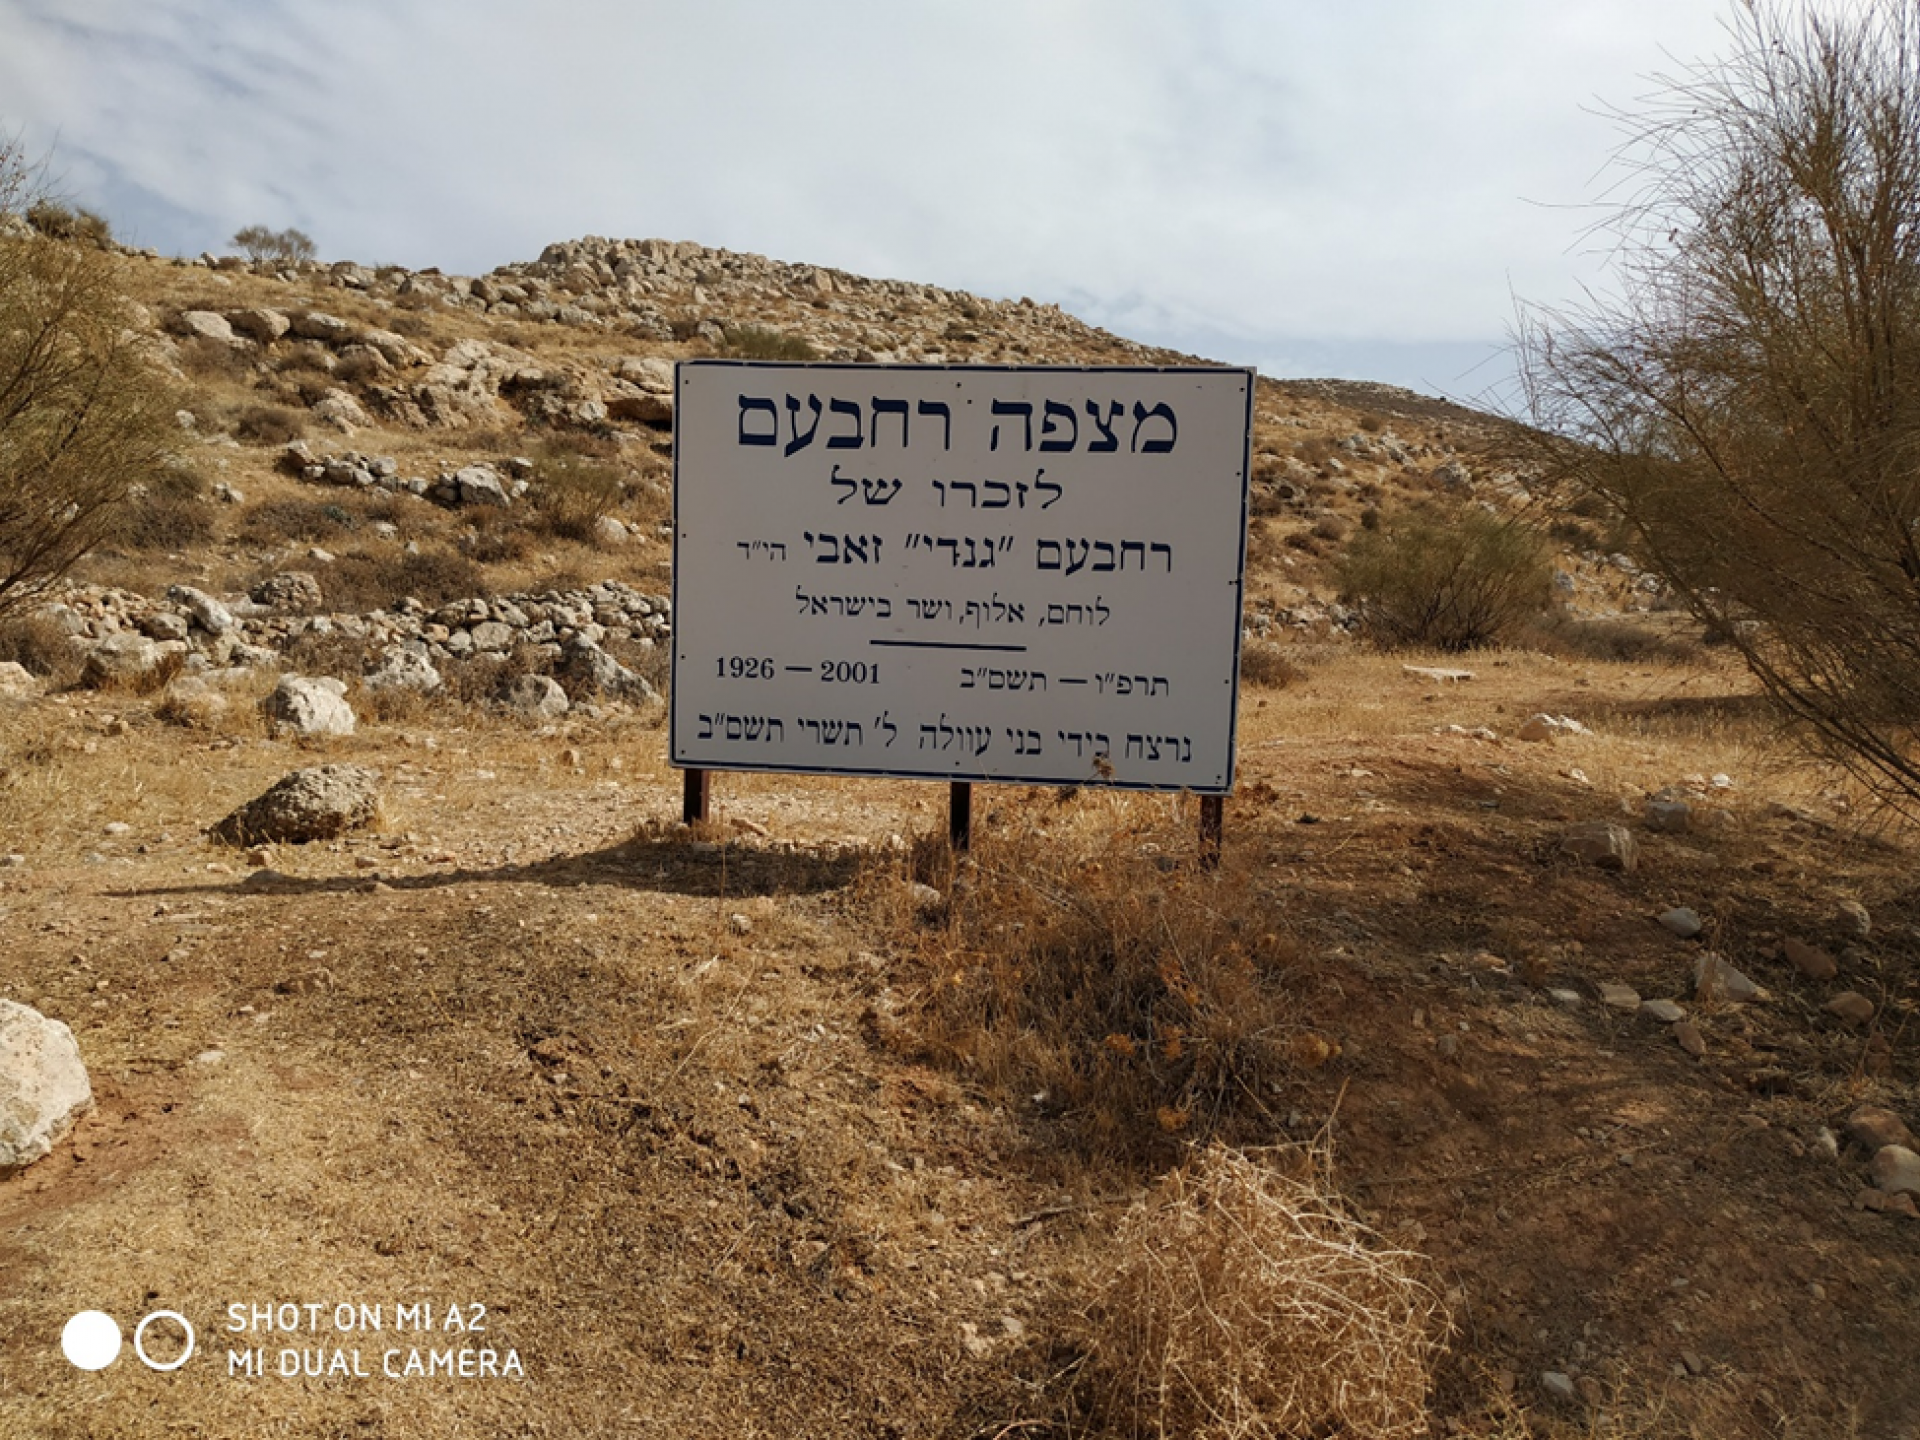 A sign designating the Rechav’am Ze’evi Observation Point on the trail leading to maqam Sit Zahra. The observation site is already constructed with a new stage next to it, but for some reason the sign has not yet been placed there